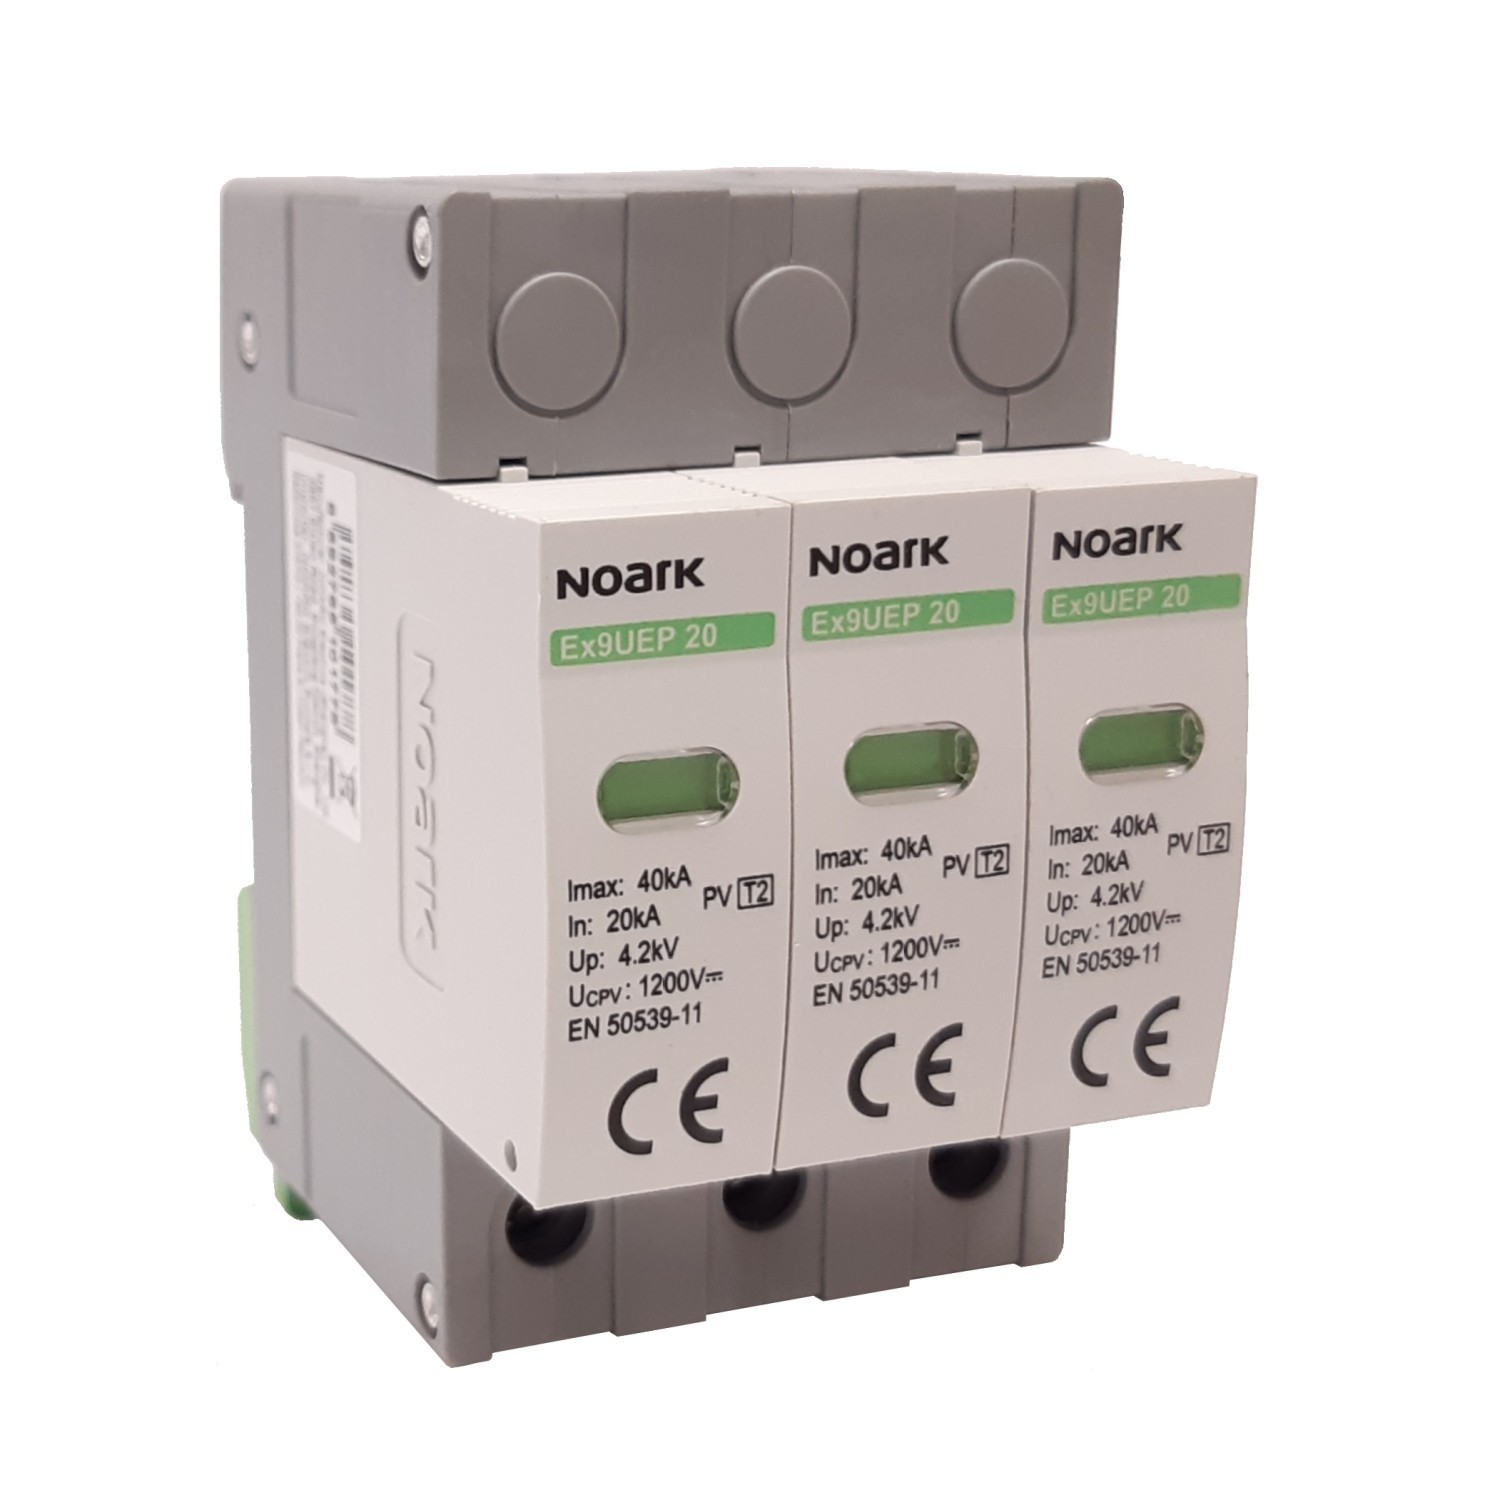 Surge arrester 1200 V Type 2 with auxiliary contact Noark